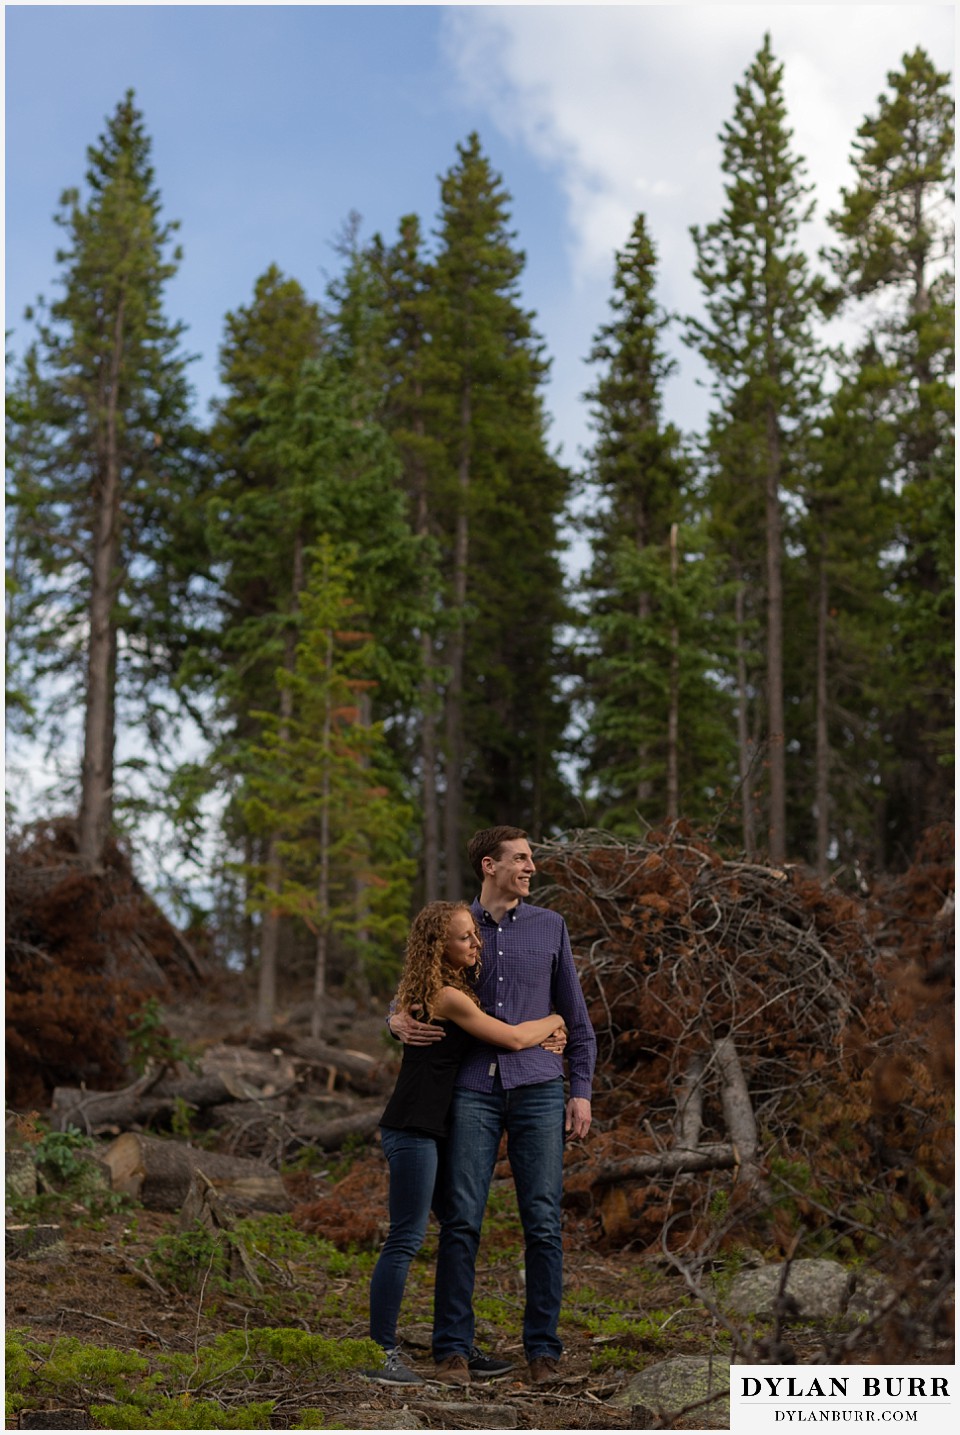 colorado mountain enagagement photo session couple standing together in stacks of pine trees